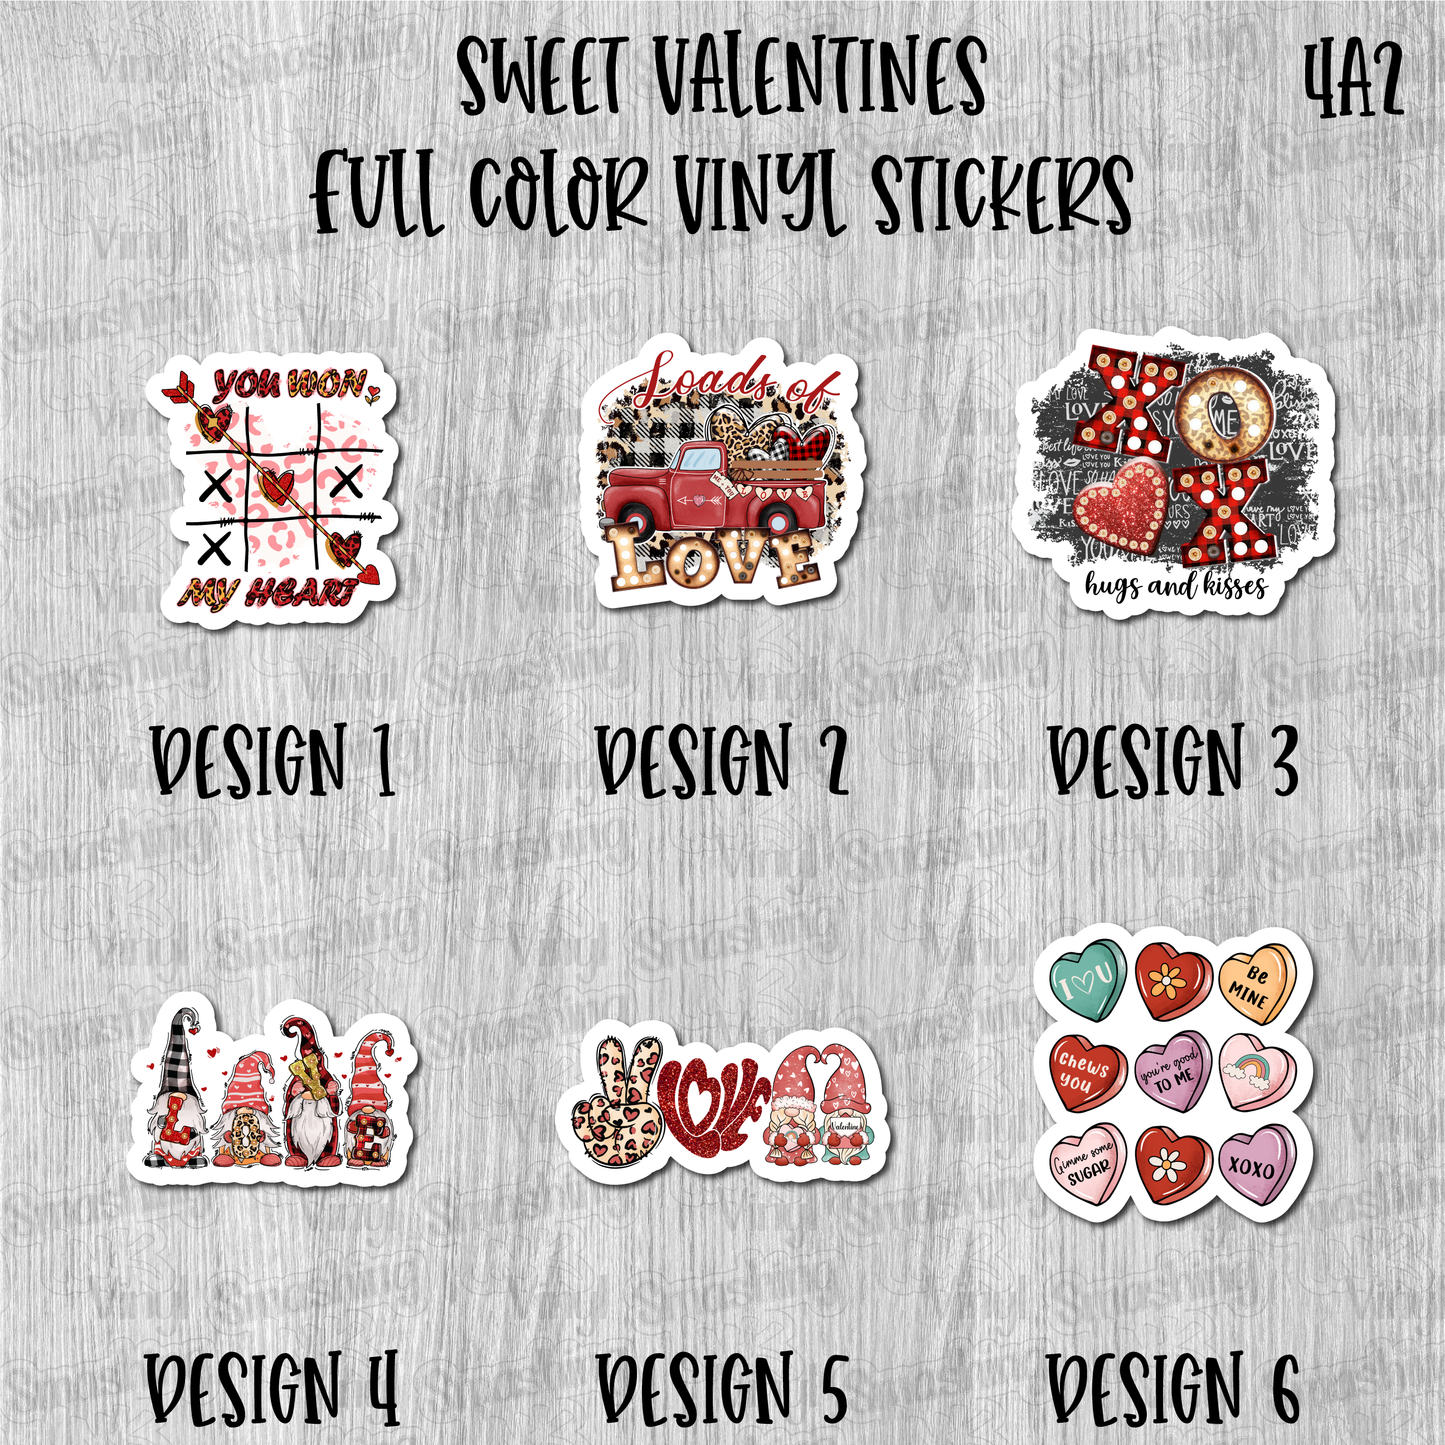 Sweet Valentines - Full Color Vinyl Stickers (SHIPS IN 3-7 BUS DAYS)